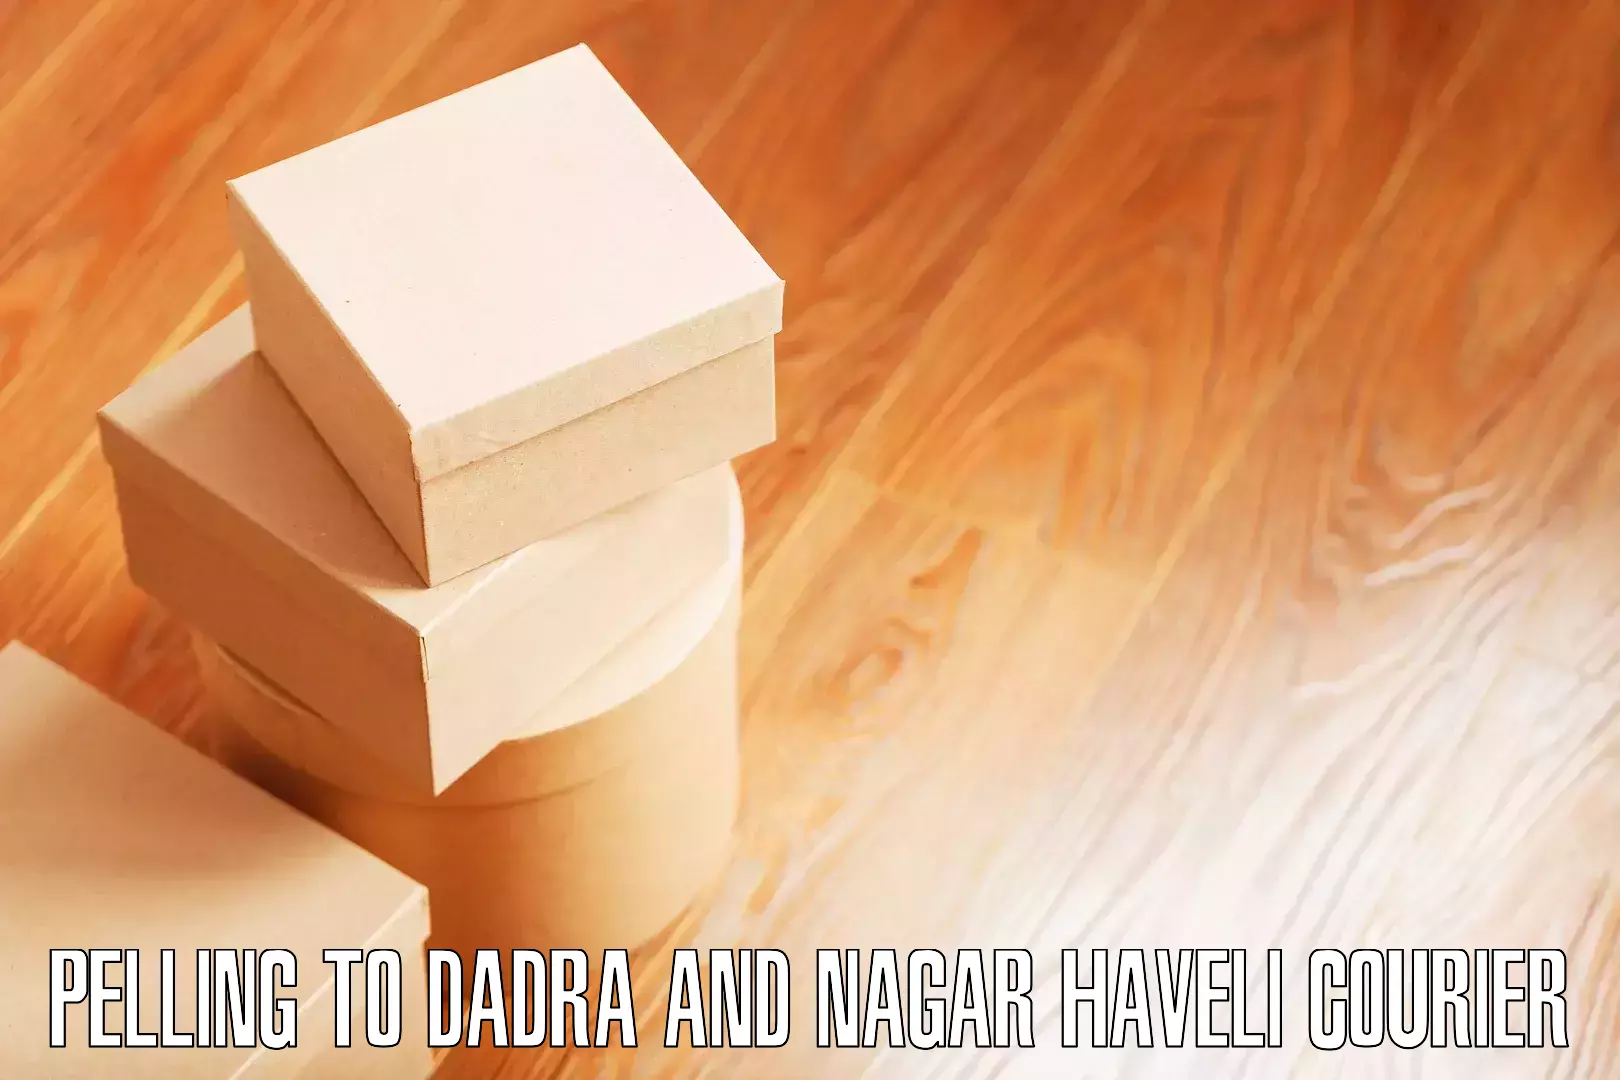 Efficient moving company Pelling to Dadra and Nagar Haveli